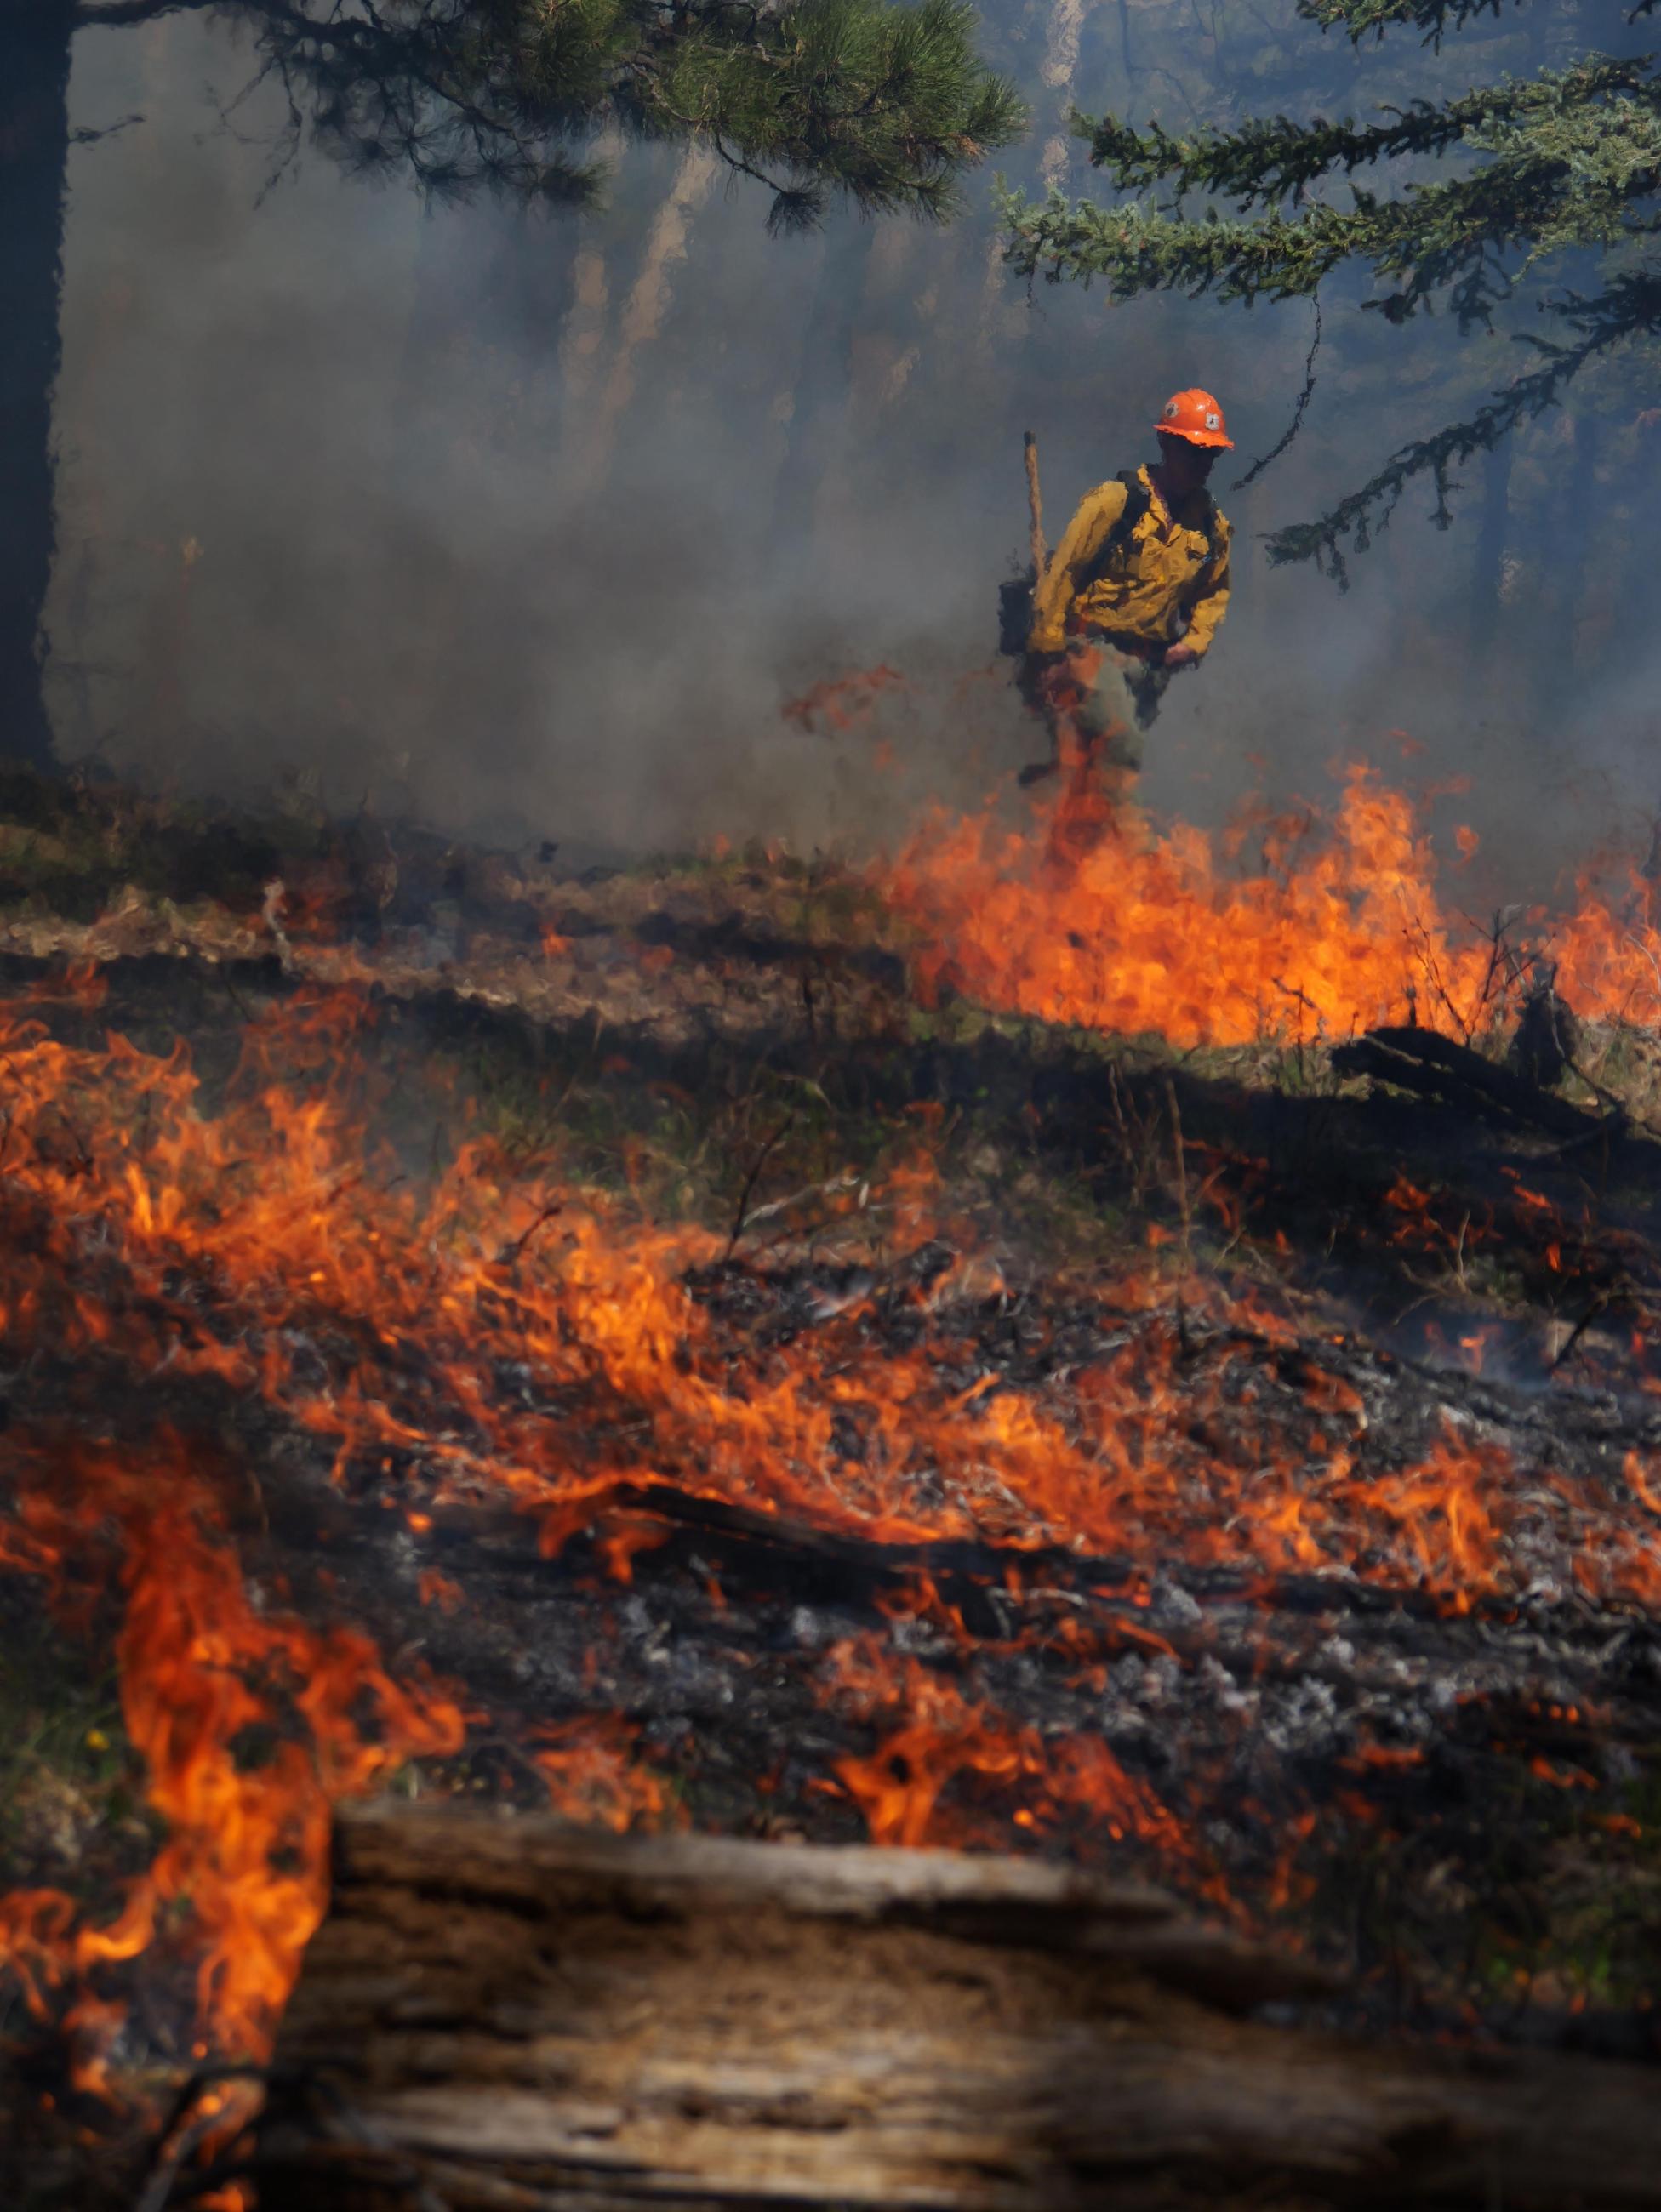 Flames, smoke and heat waves fill most of the picture while a firefighter with an axe is seen moving in the distance.